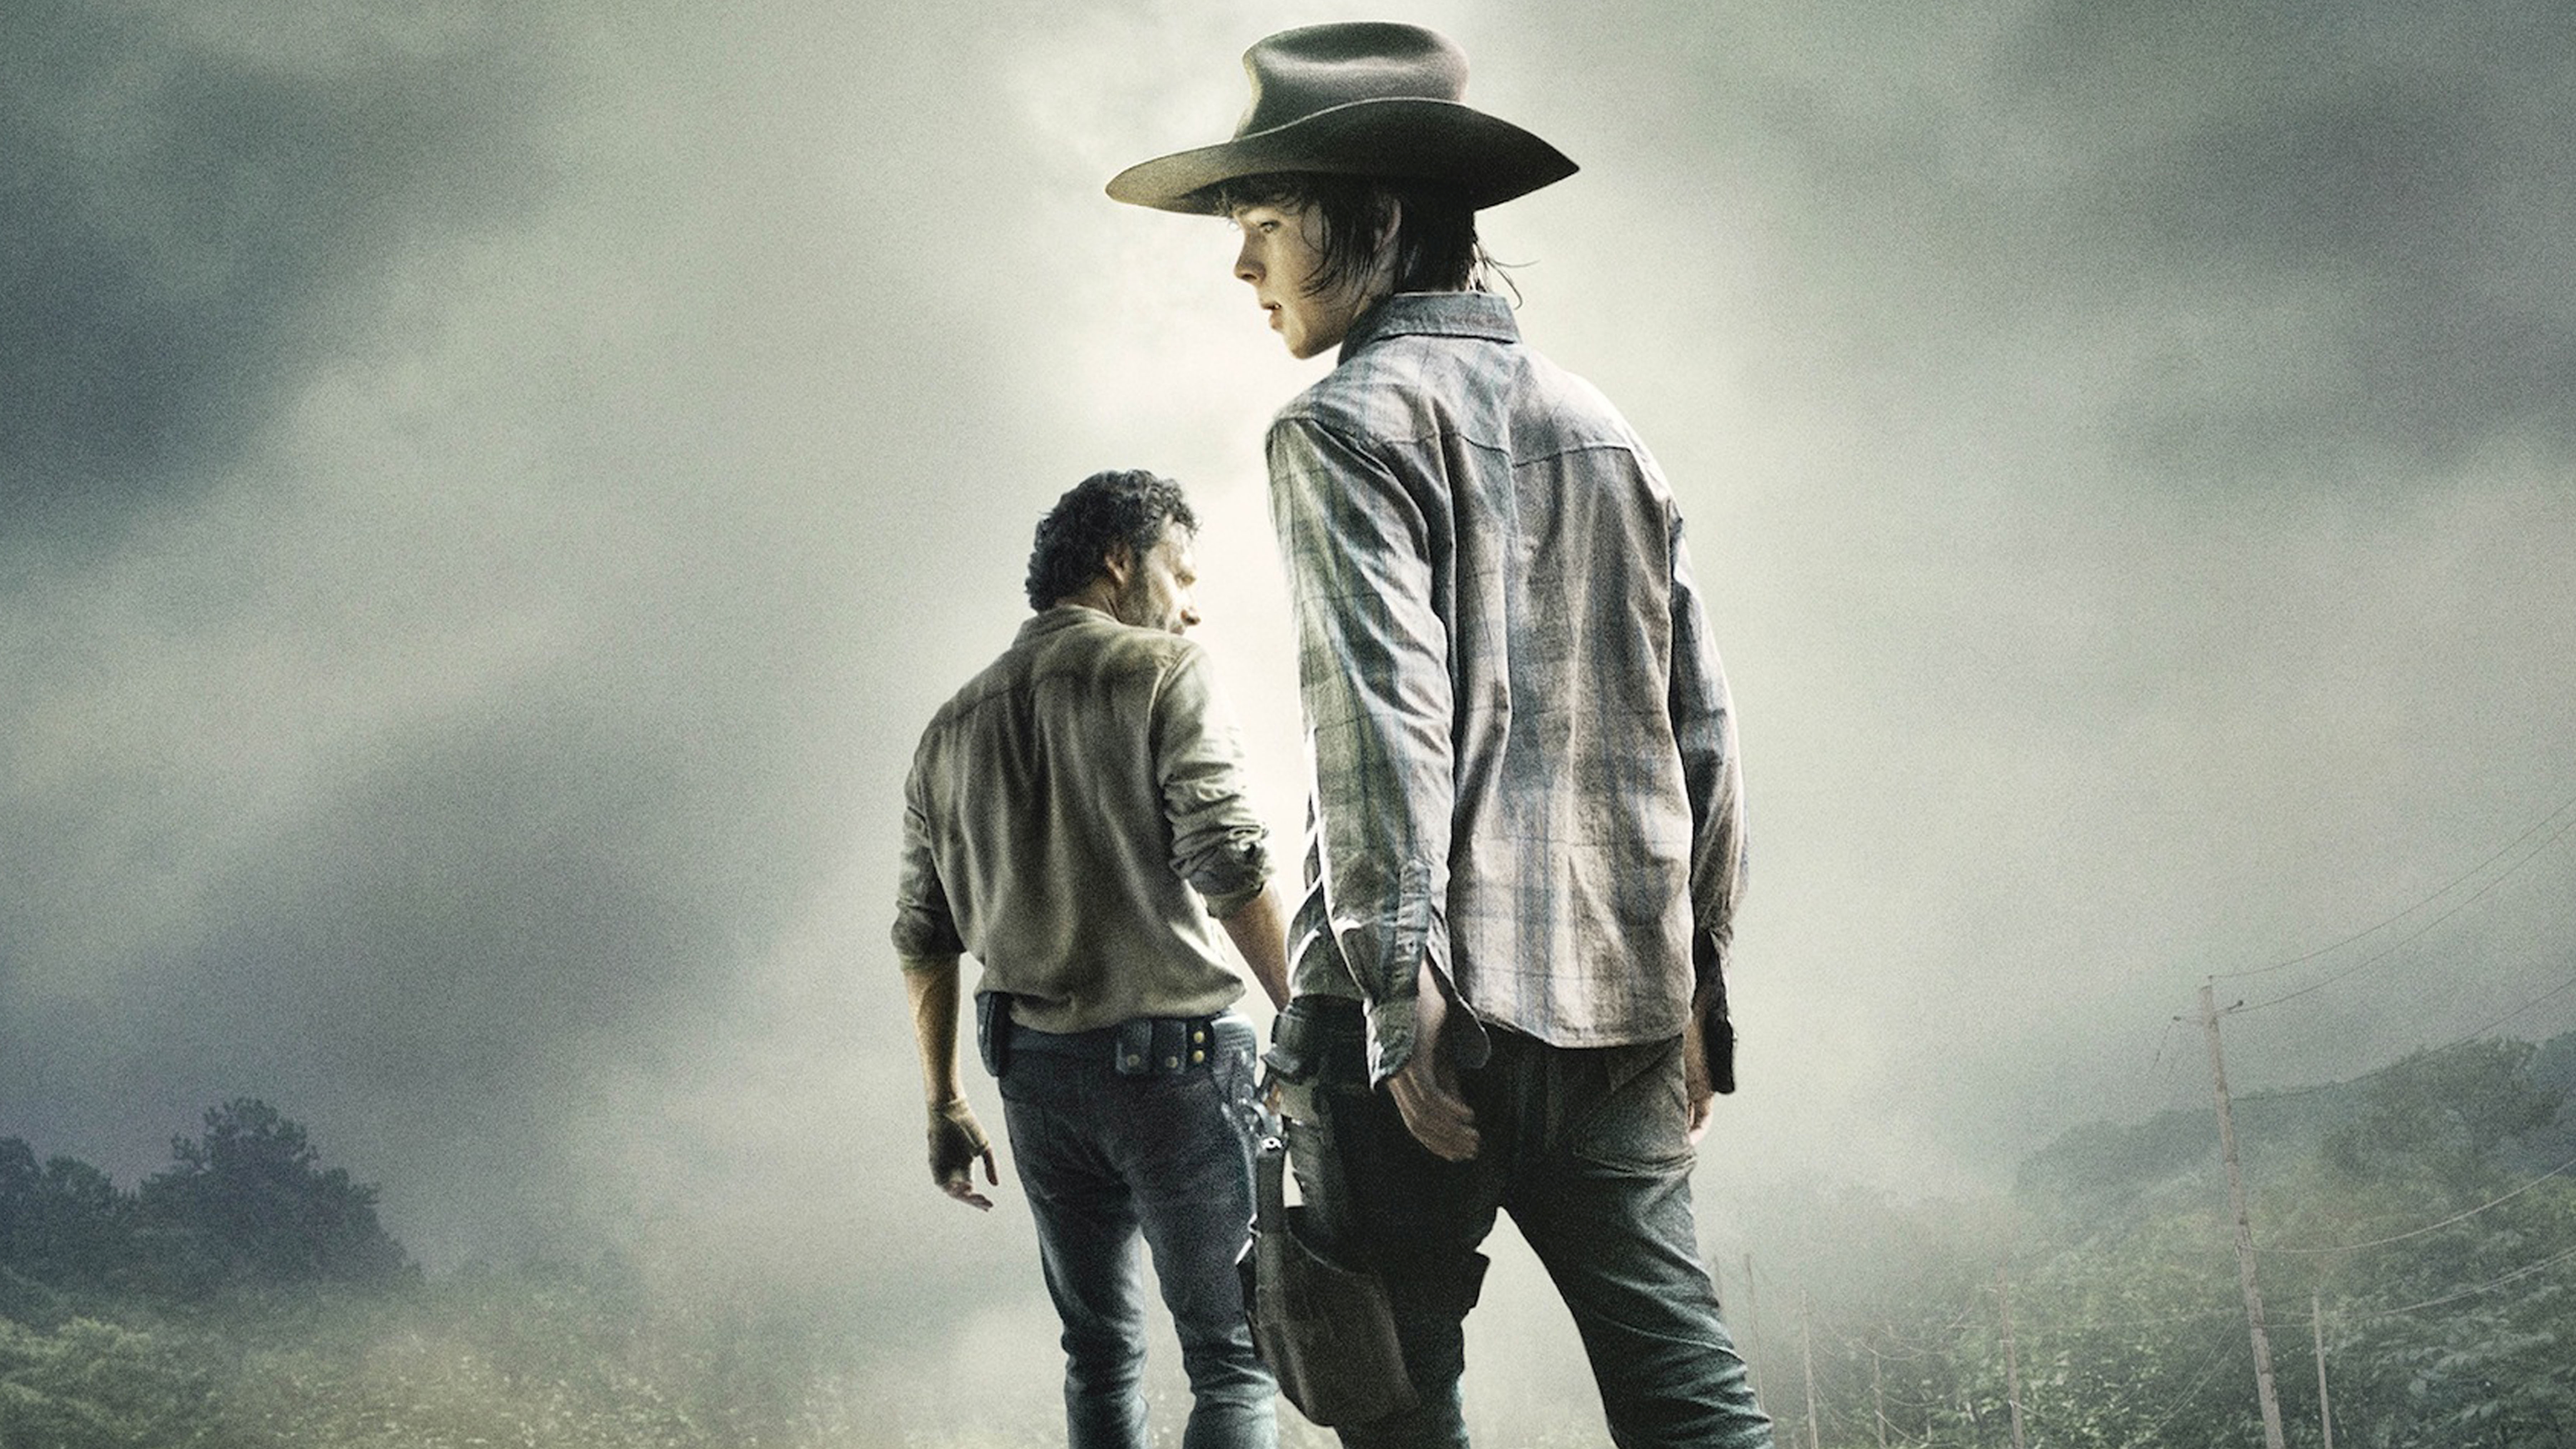 the walking dead, tv show, andrew lincoln, carl grimes, chandler riggs, rick grimes